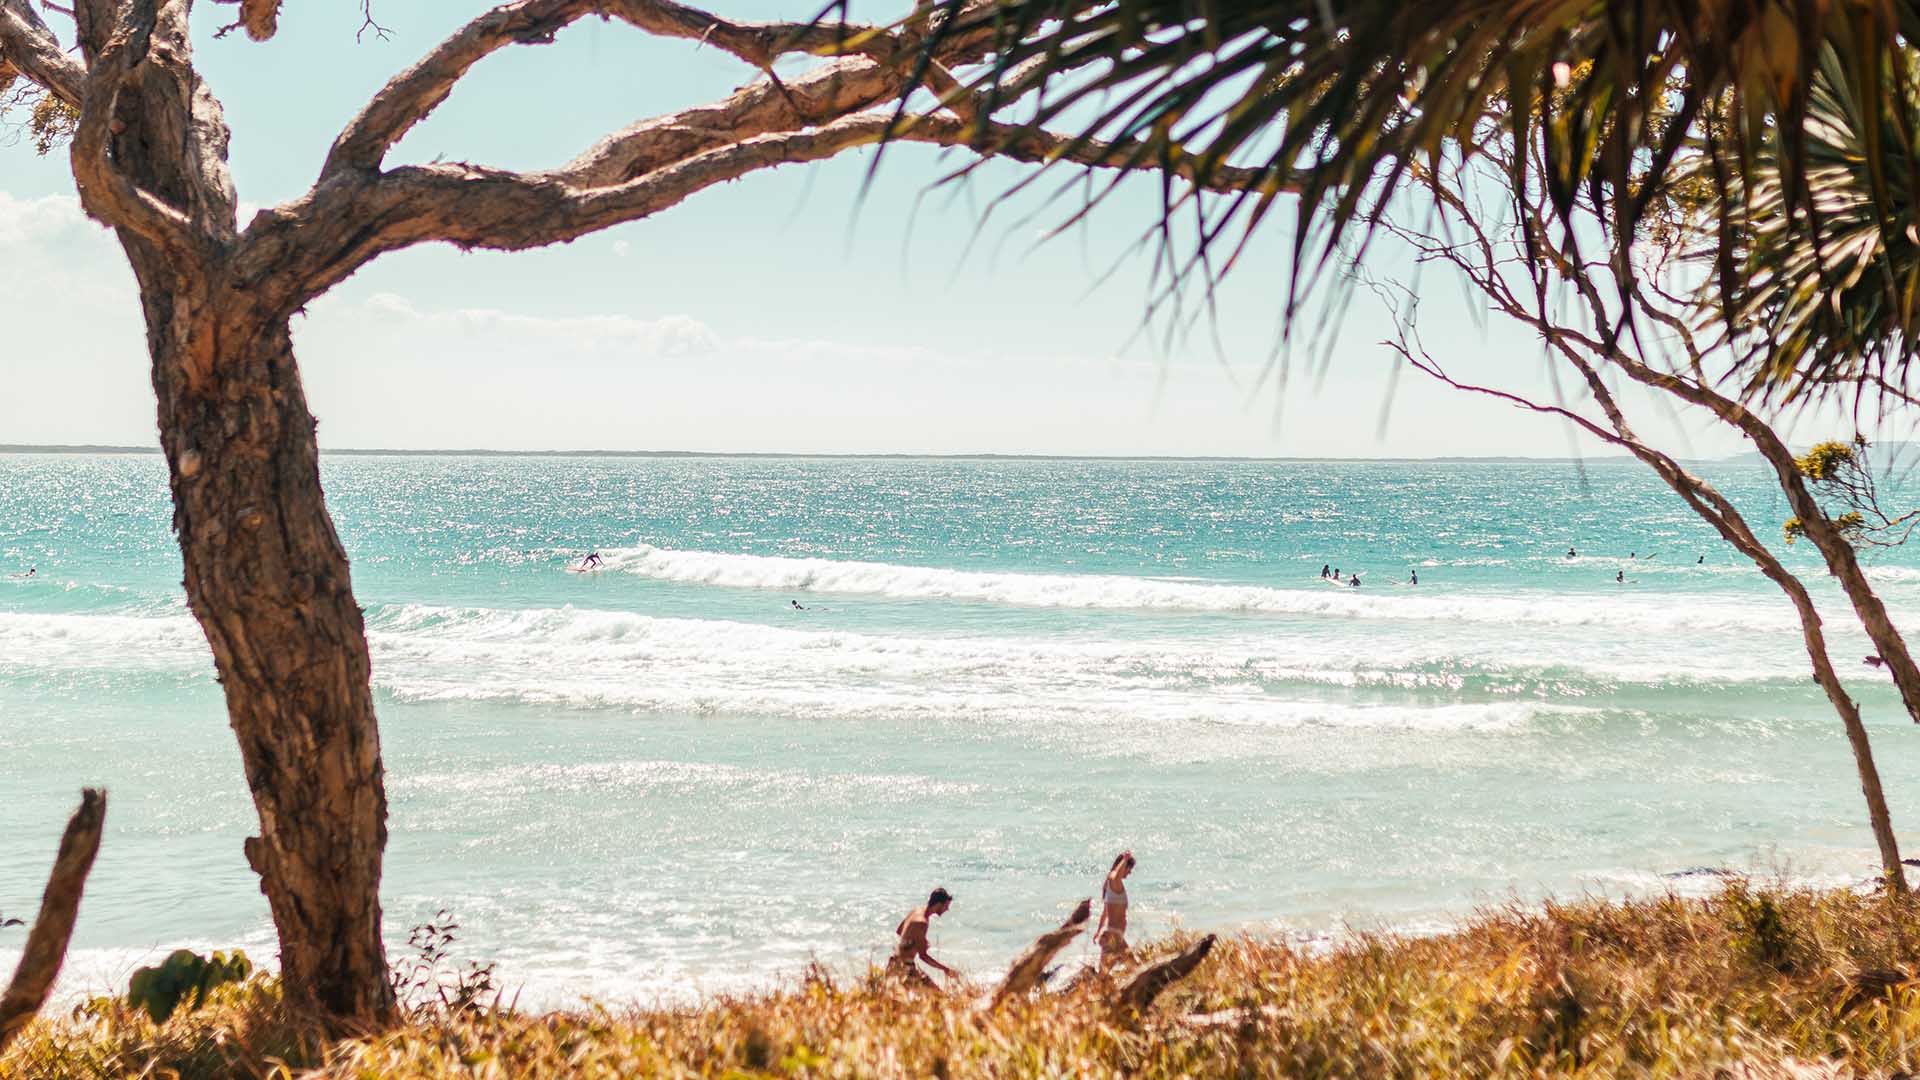 Bound Festival Is Your Next Excuse to Enjoy Food, Wine, Music and Wellness in Burleigh Heads 